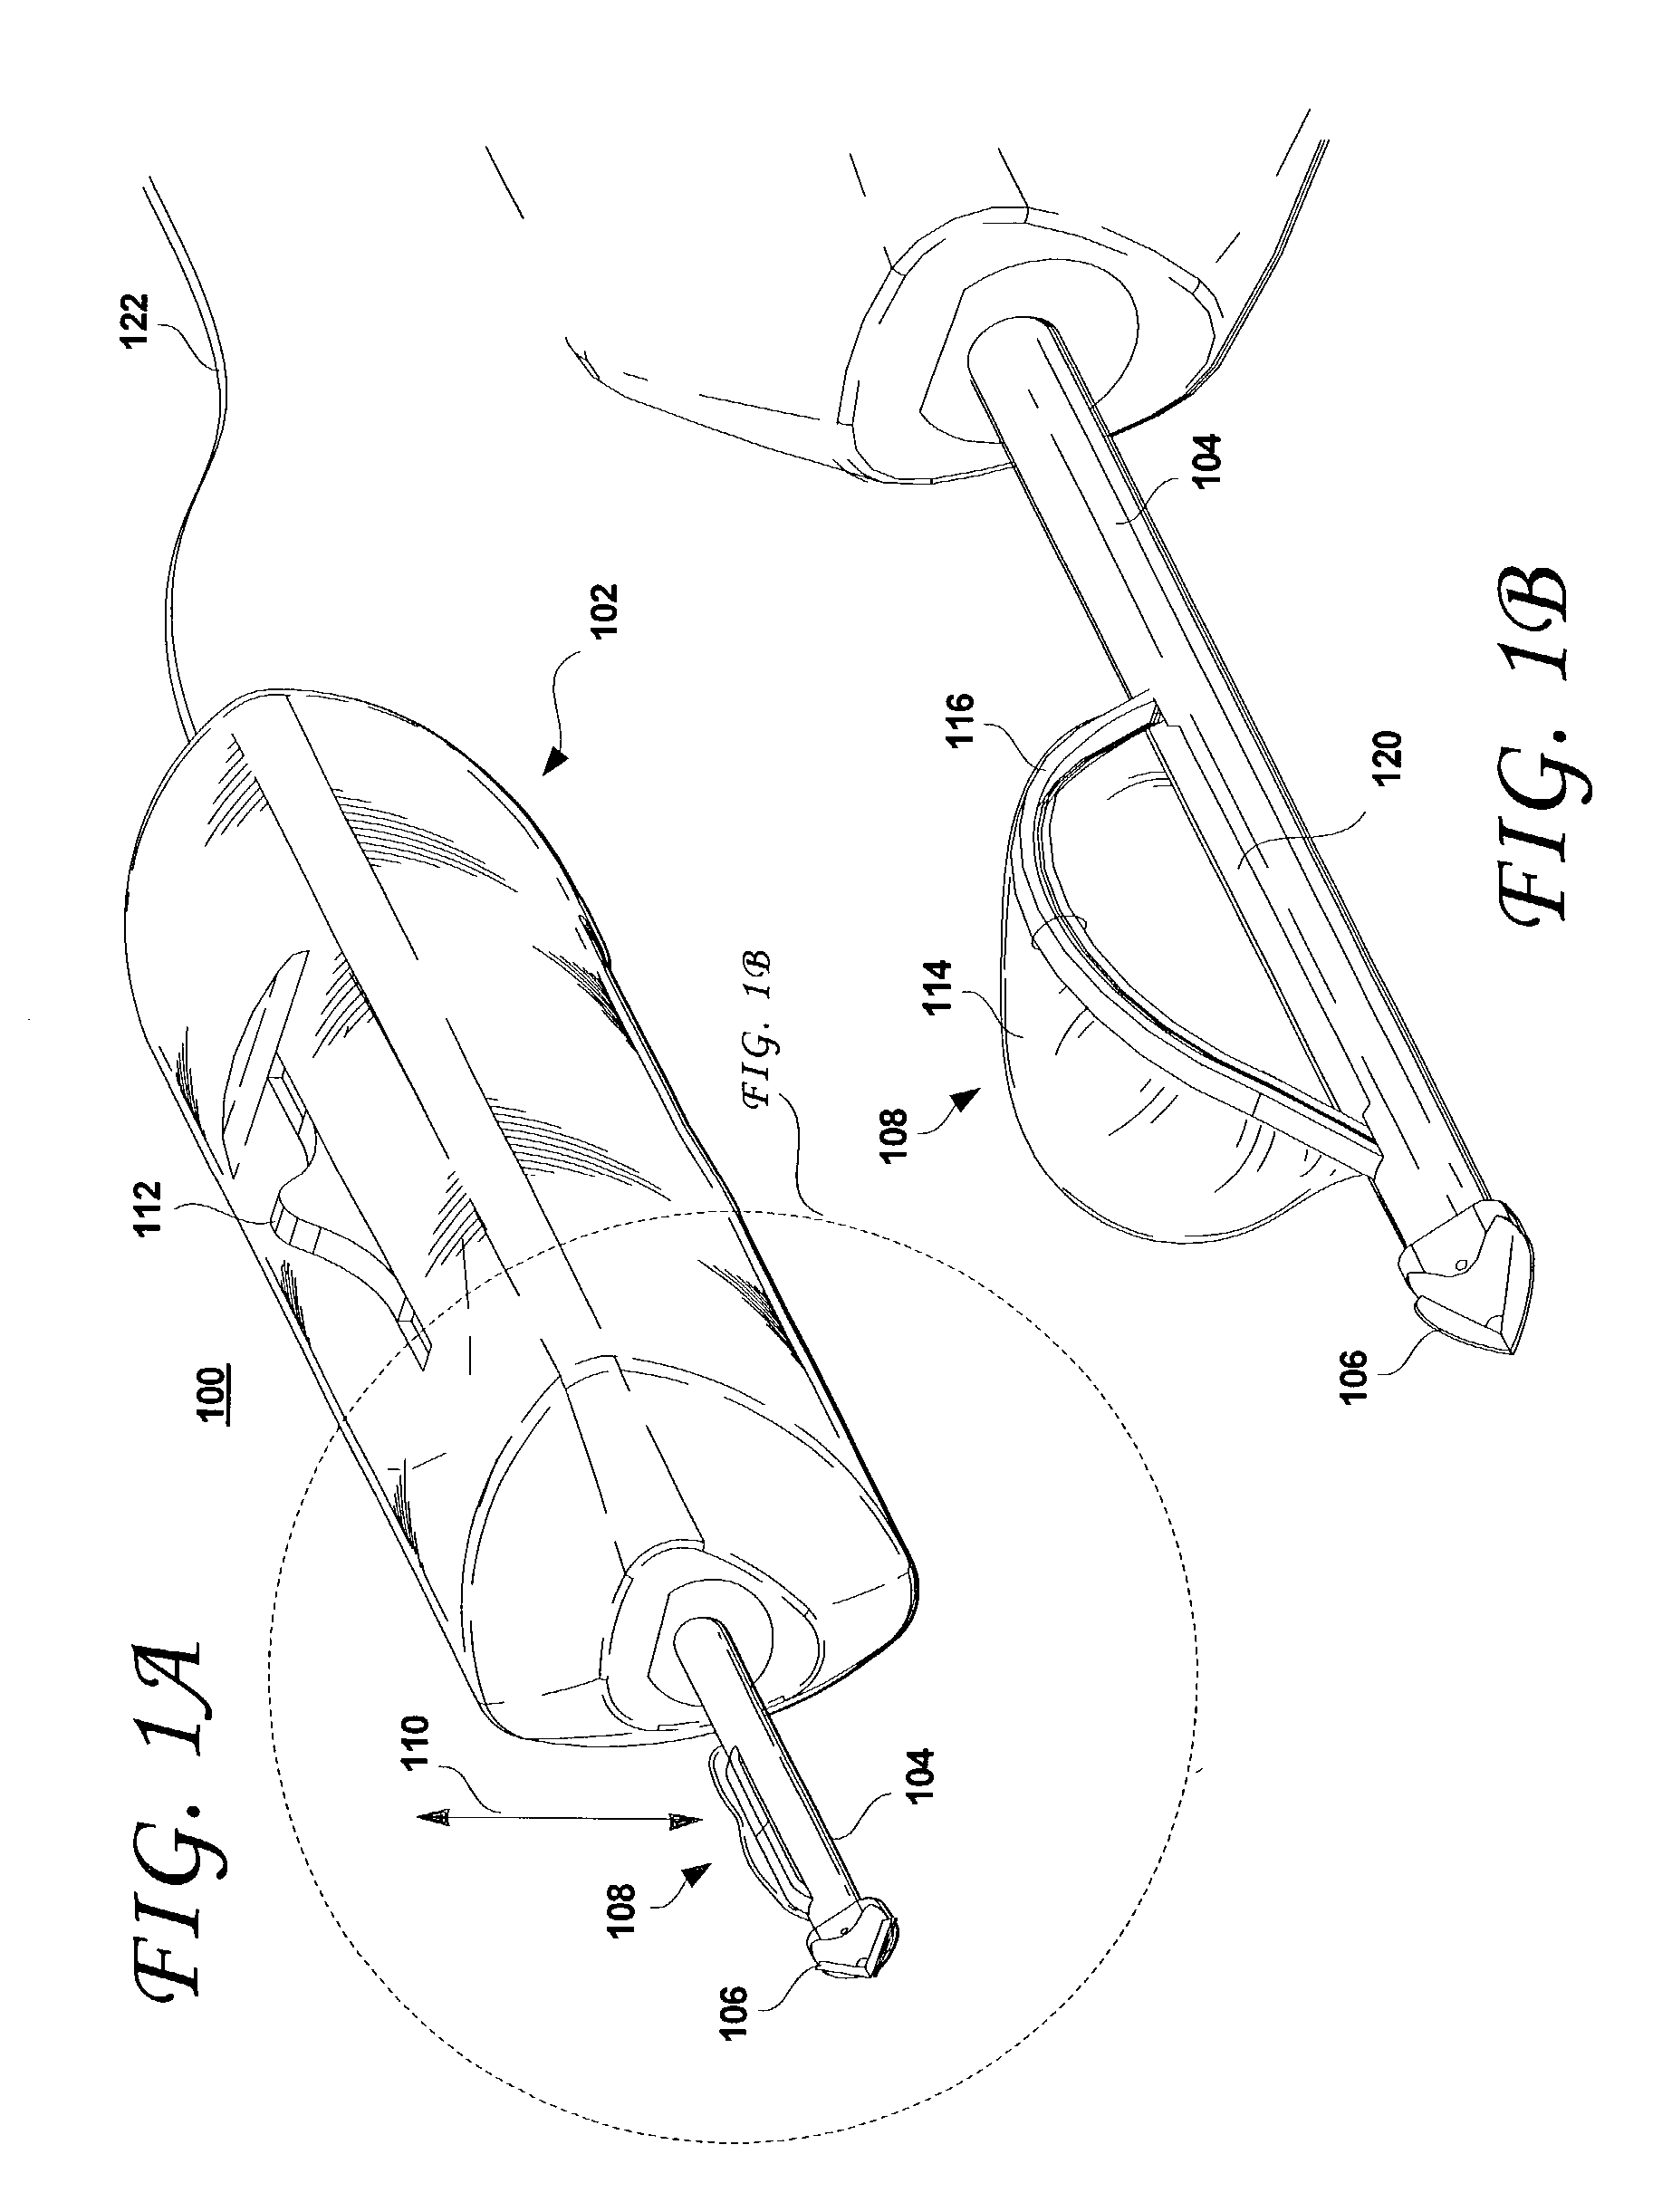 Excisional devices having selective cutting and atraumatic configurations and methods of using same